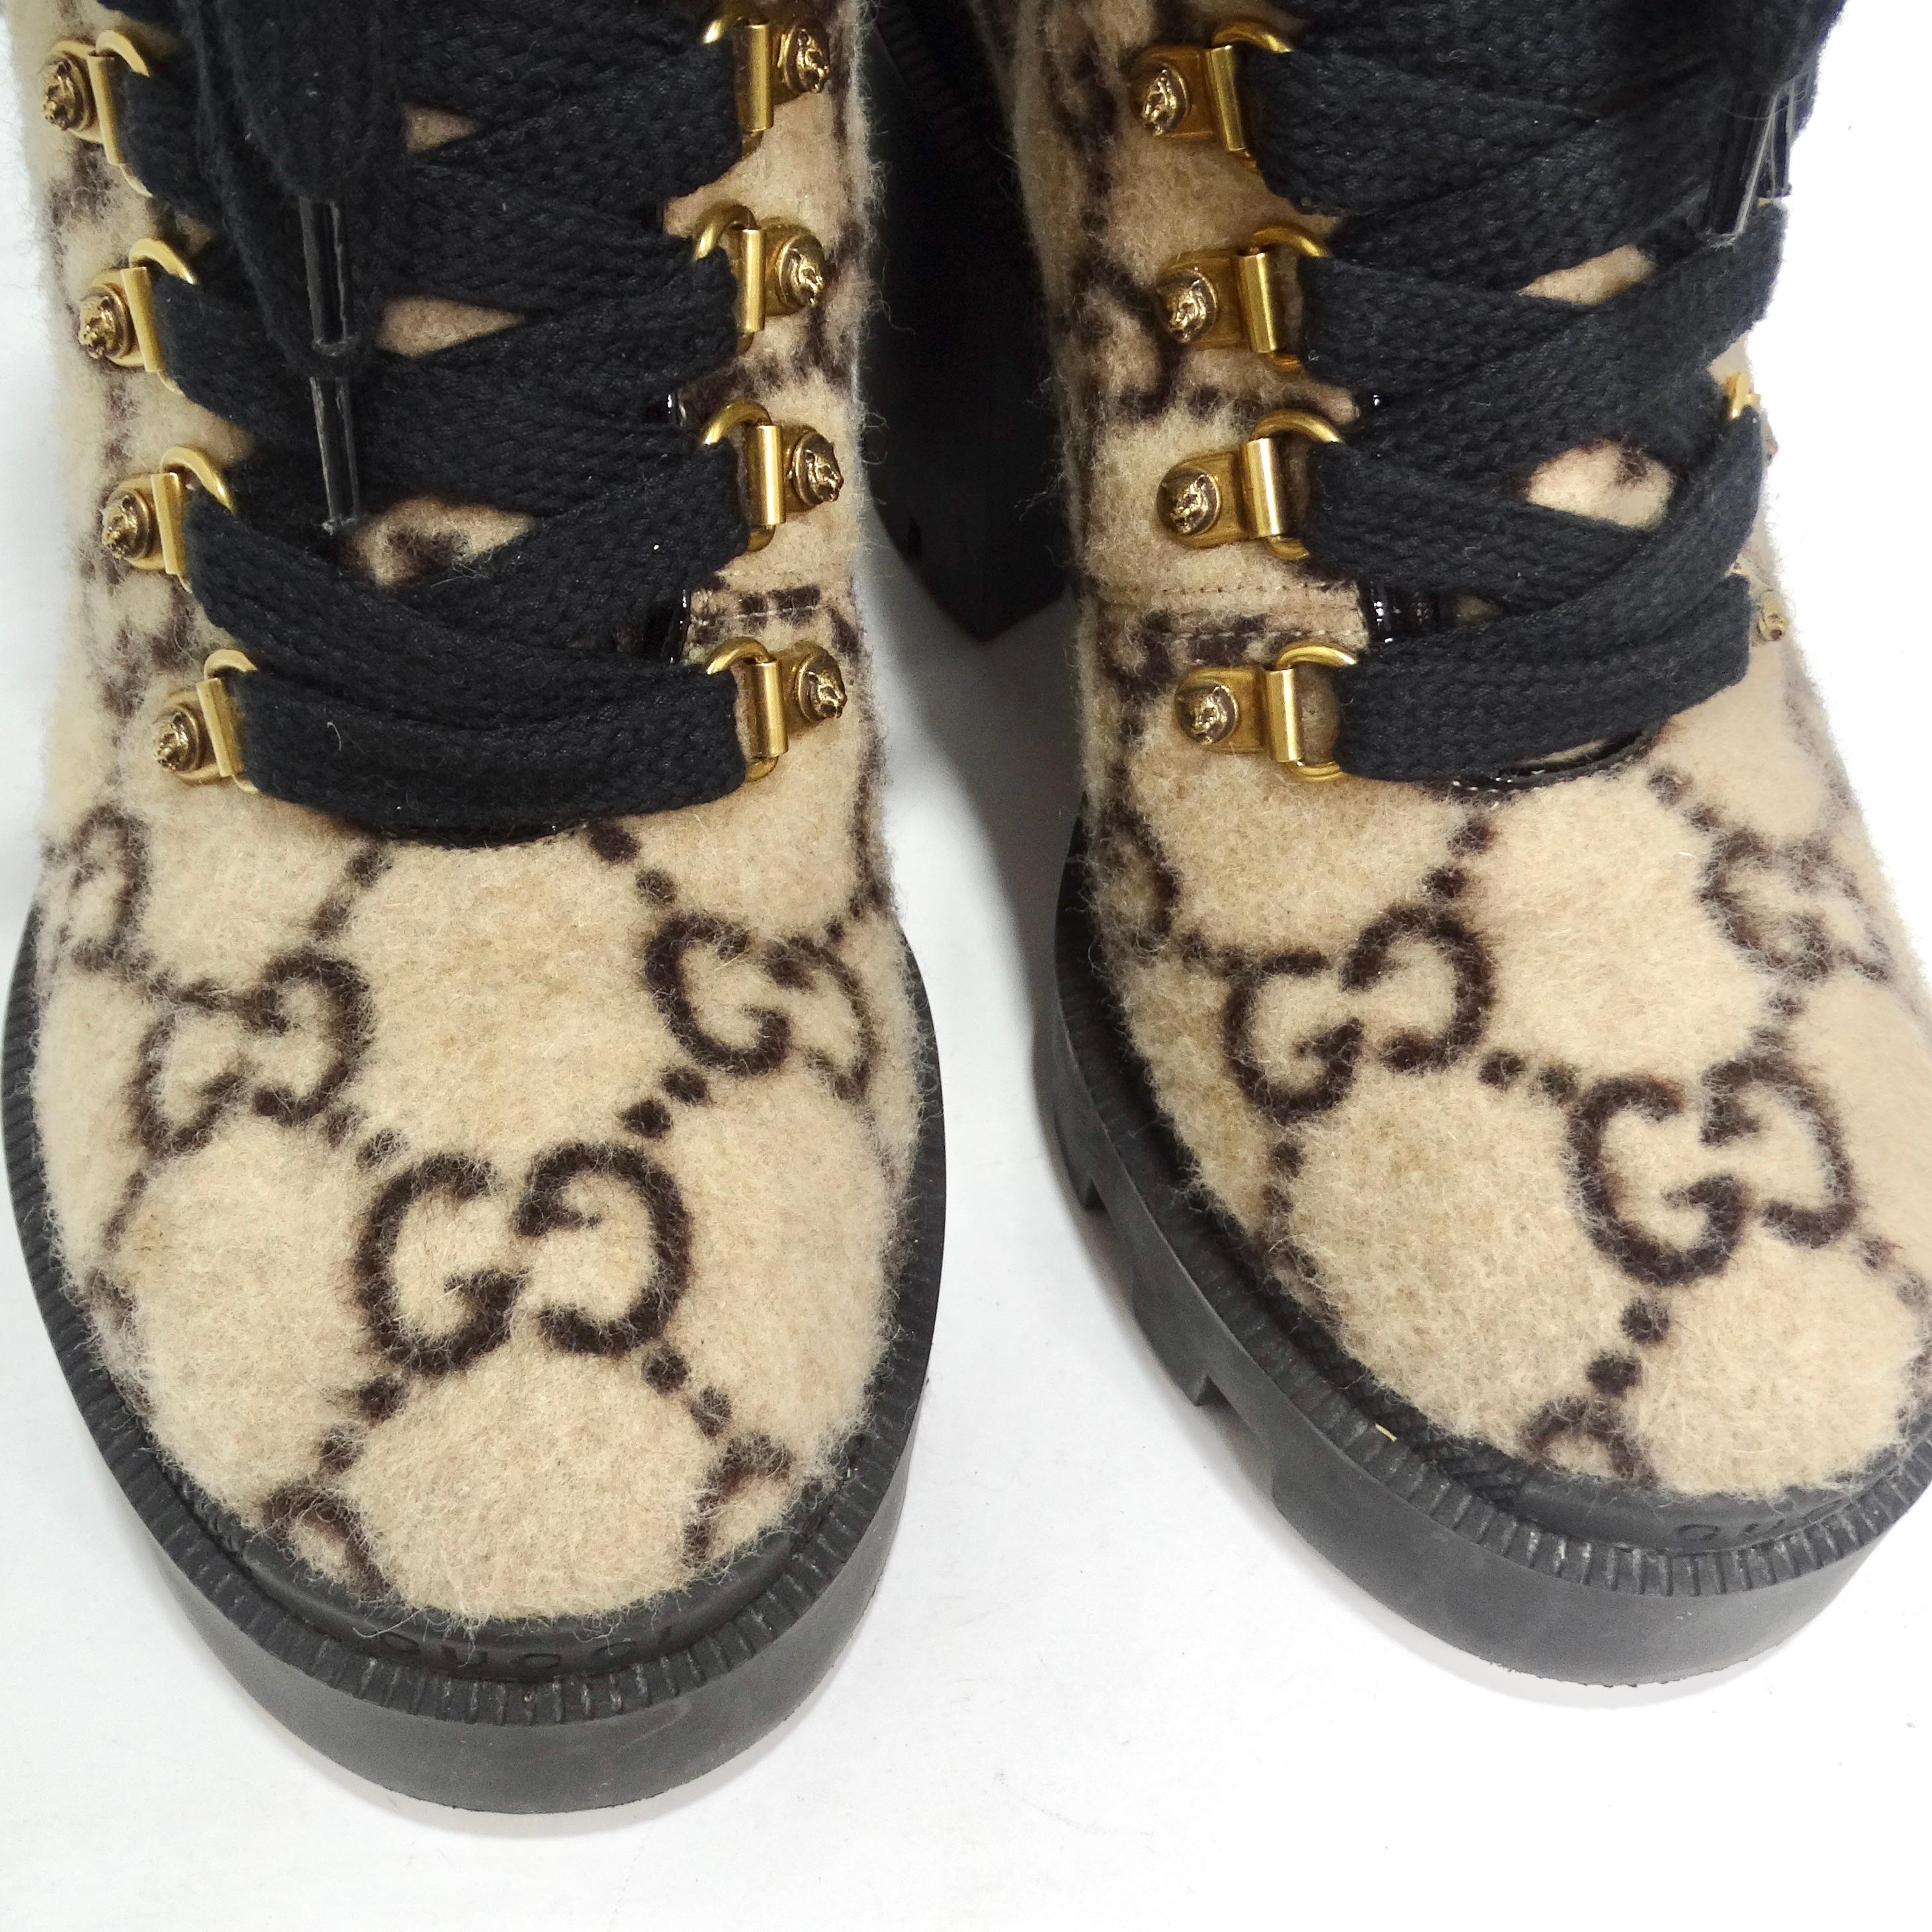 Gucci GG Monogram Wool Ankle Boots In Excellent Condition For Sale In Scottsdale, AZ